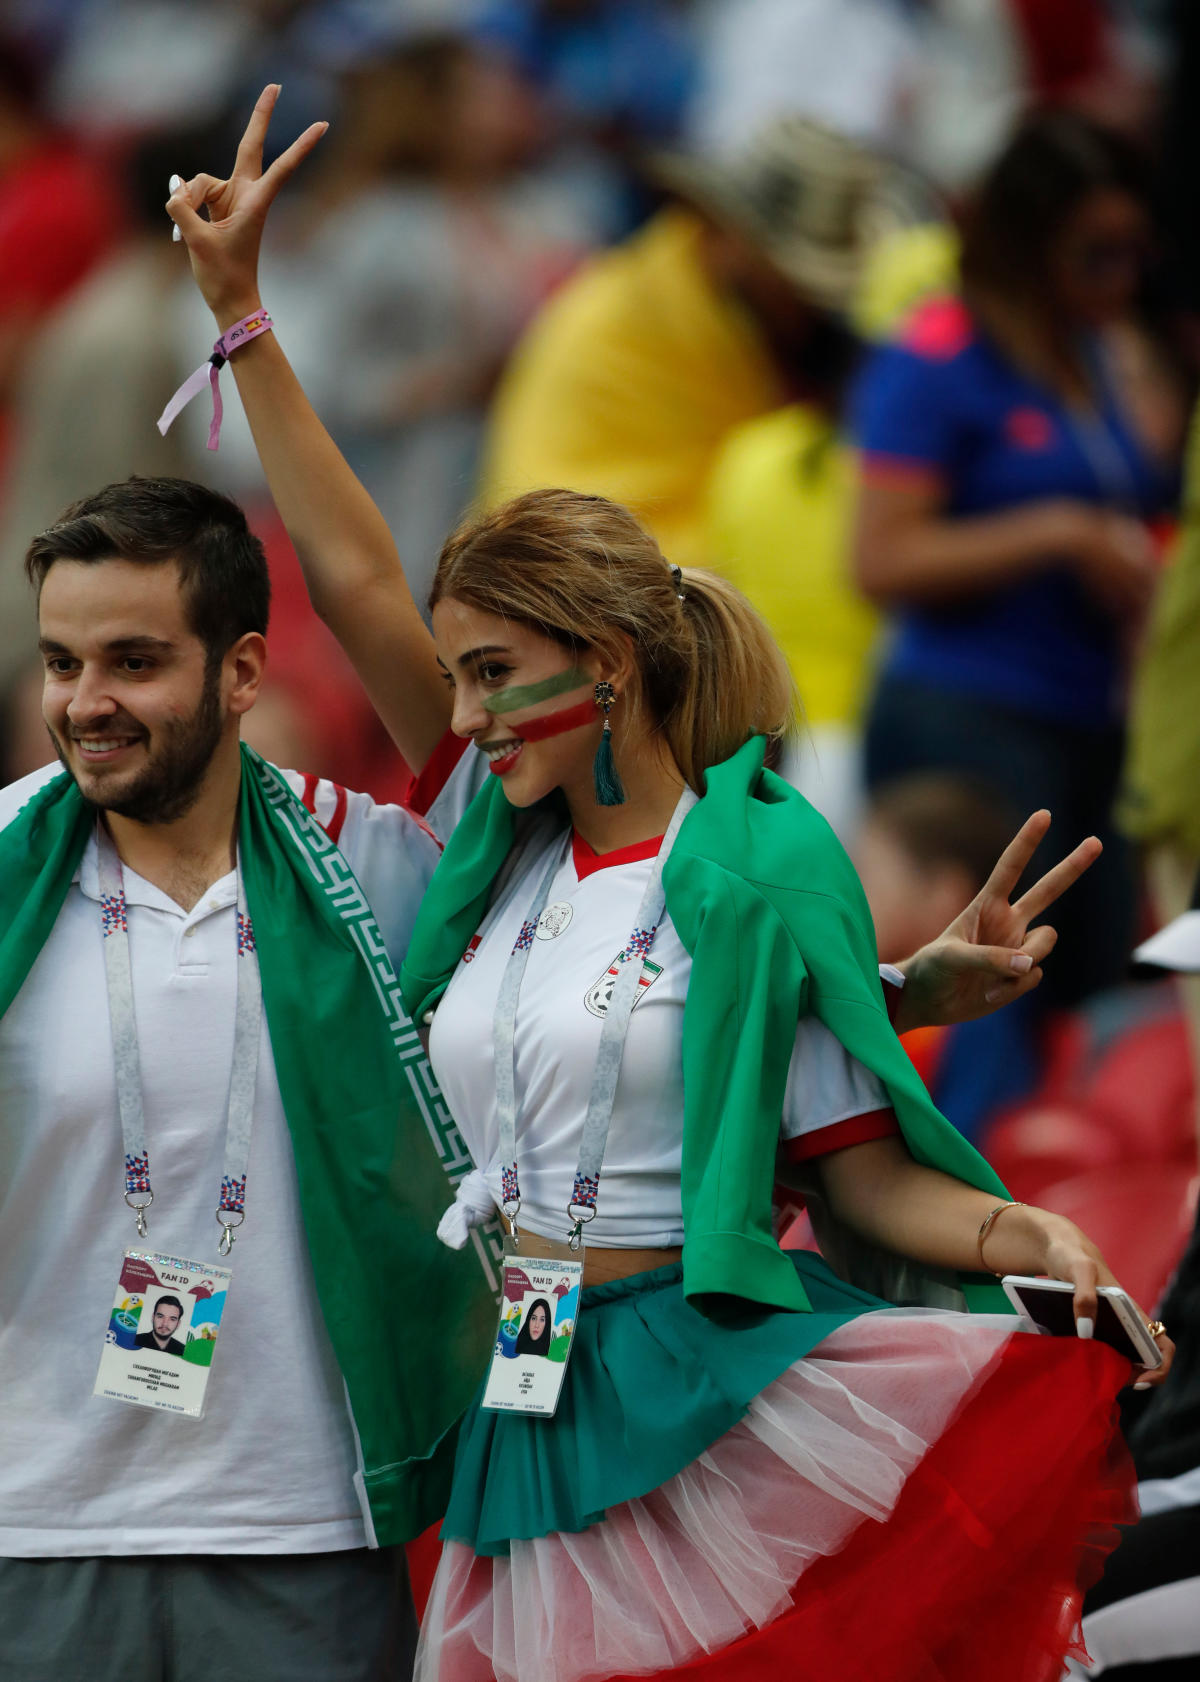 Photo of Iranian woman watching the World Cup without a hijab goes viral